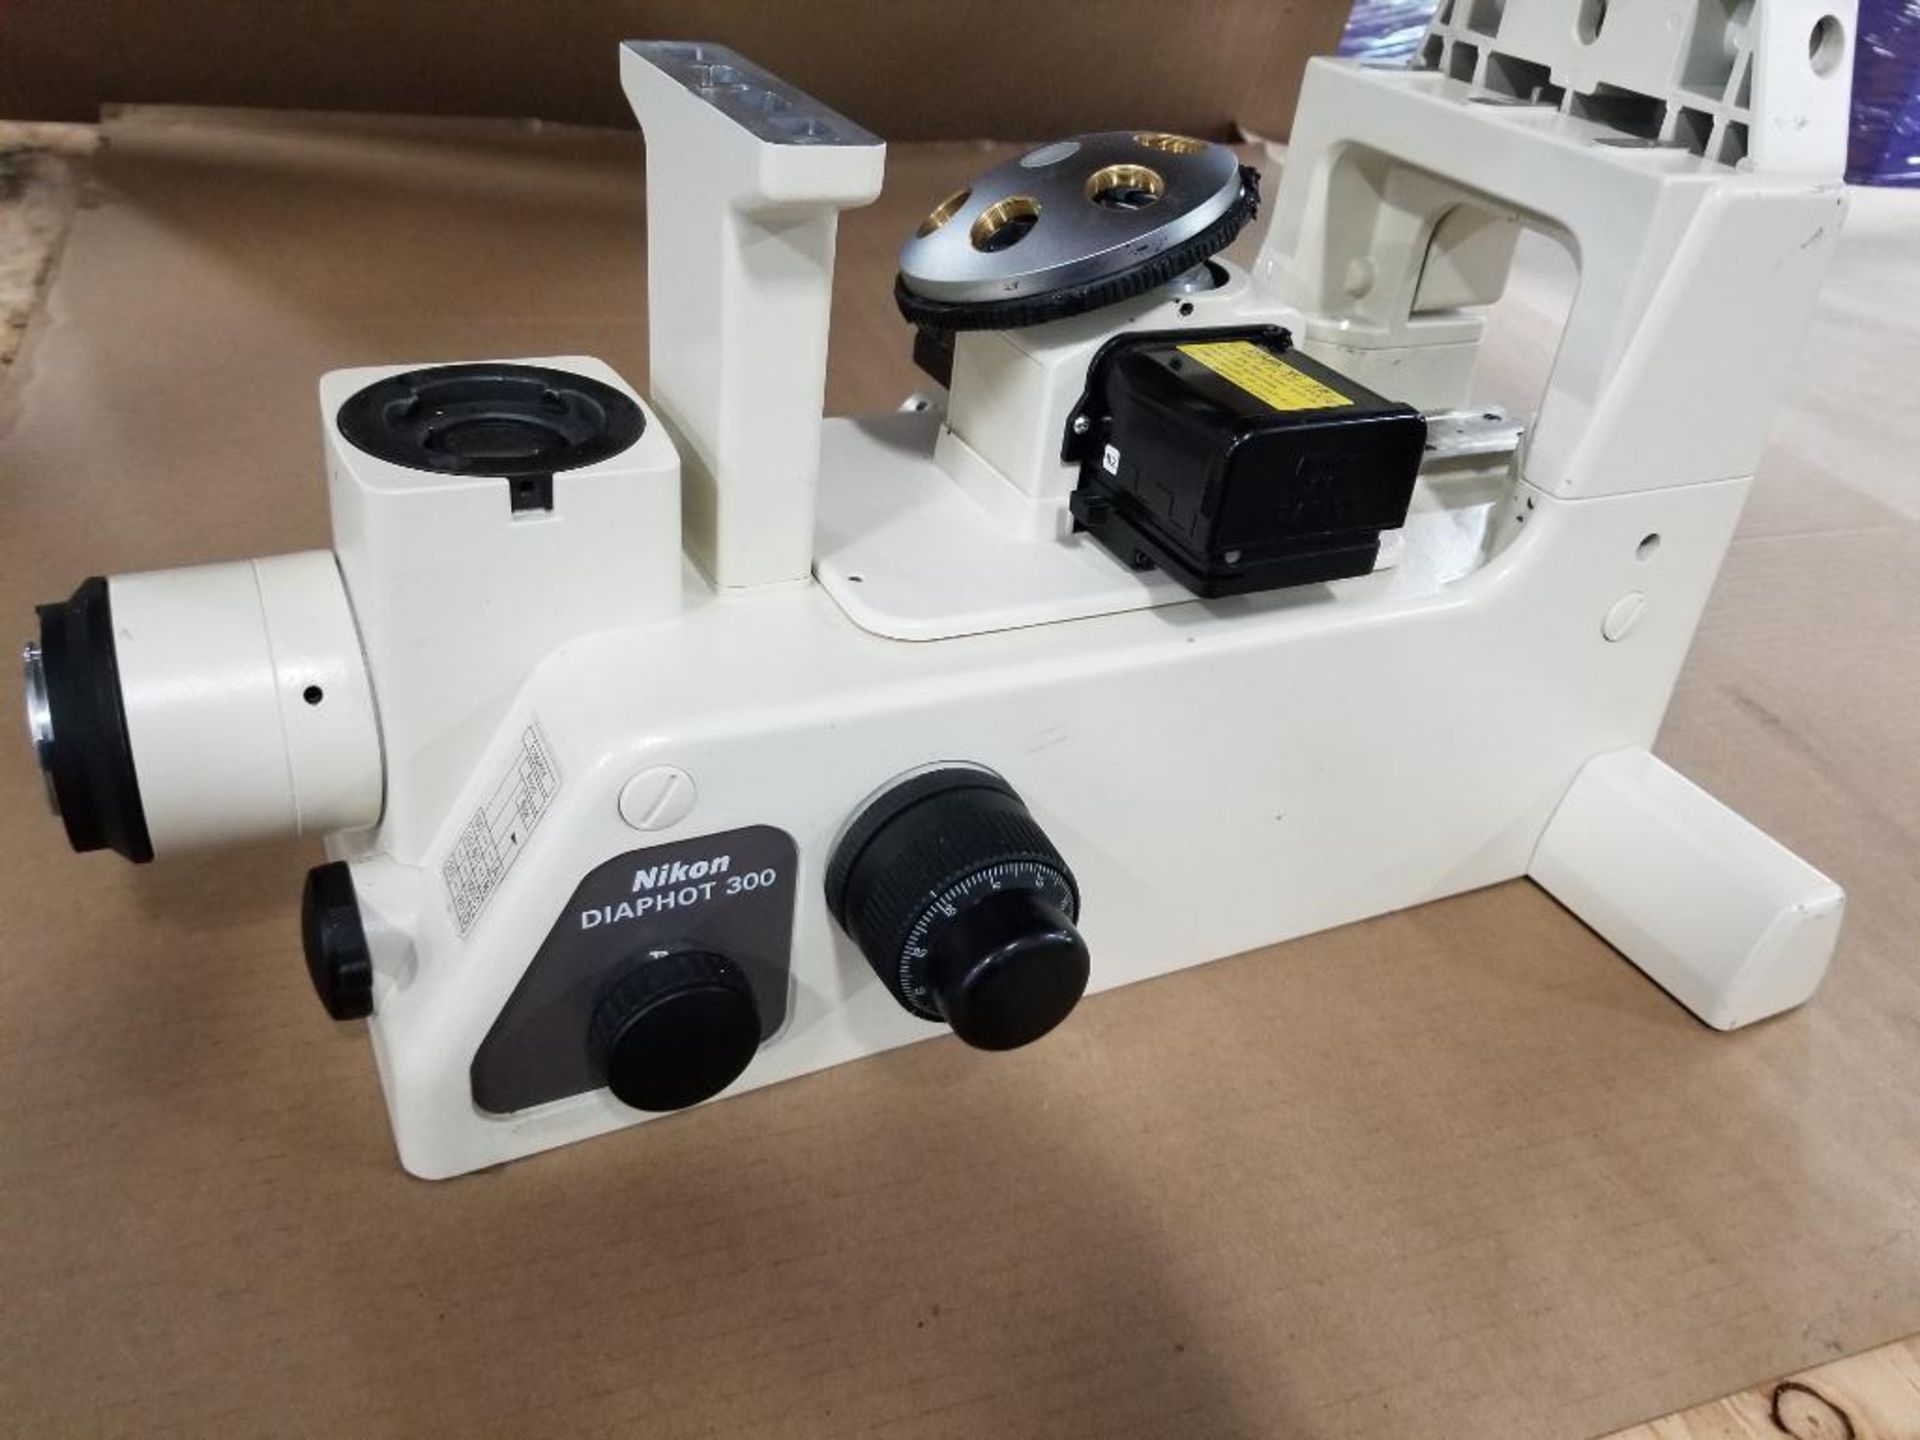 Nikon Diaphot 300 inverted fluorescent phase contrast microscope. S/N:310094 - Image 9 of 11